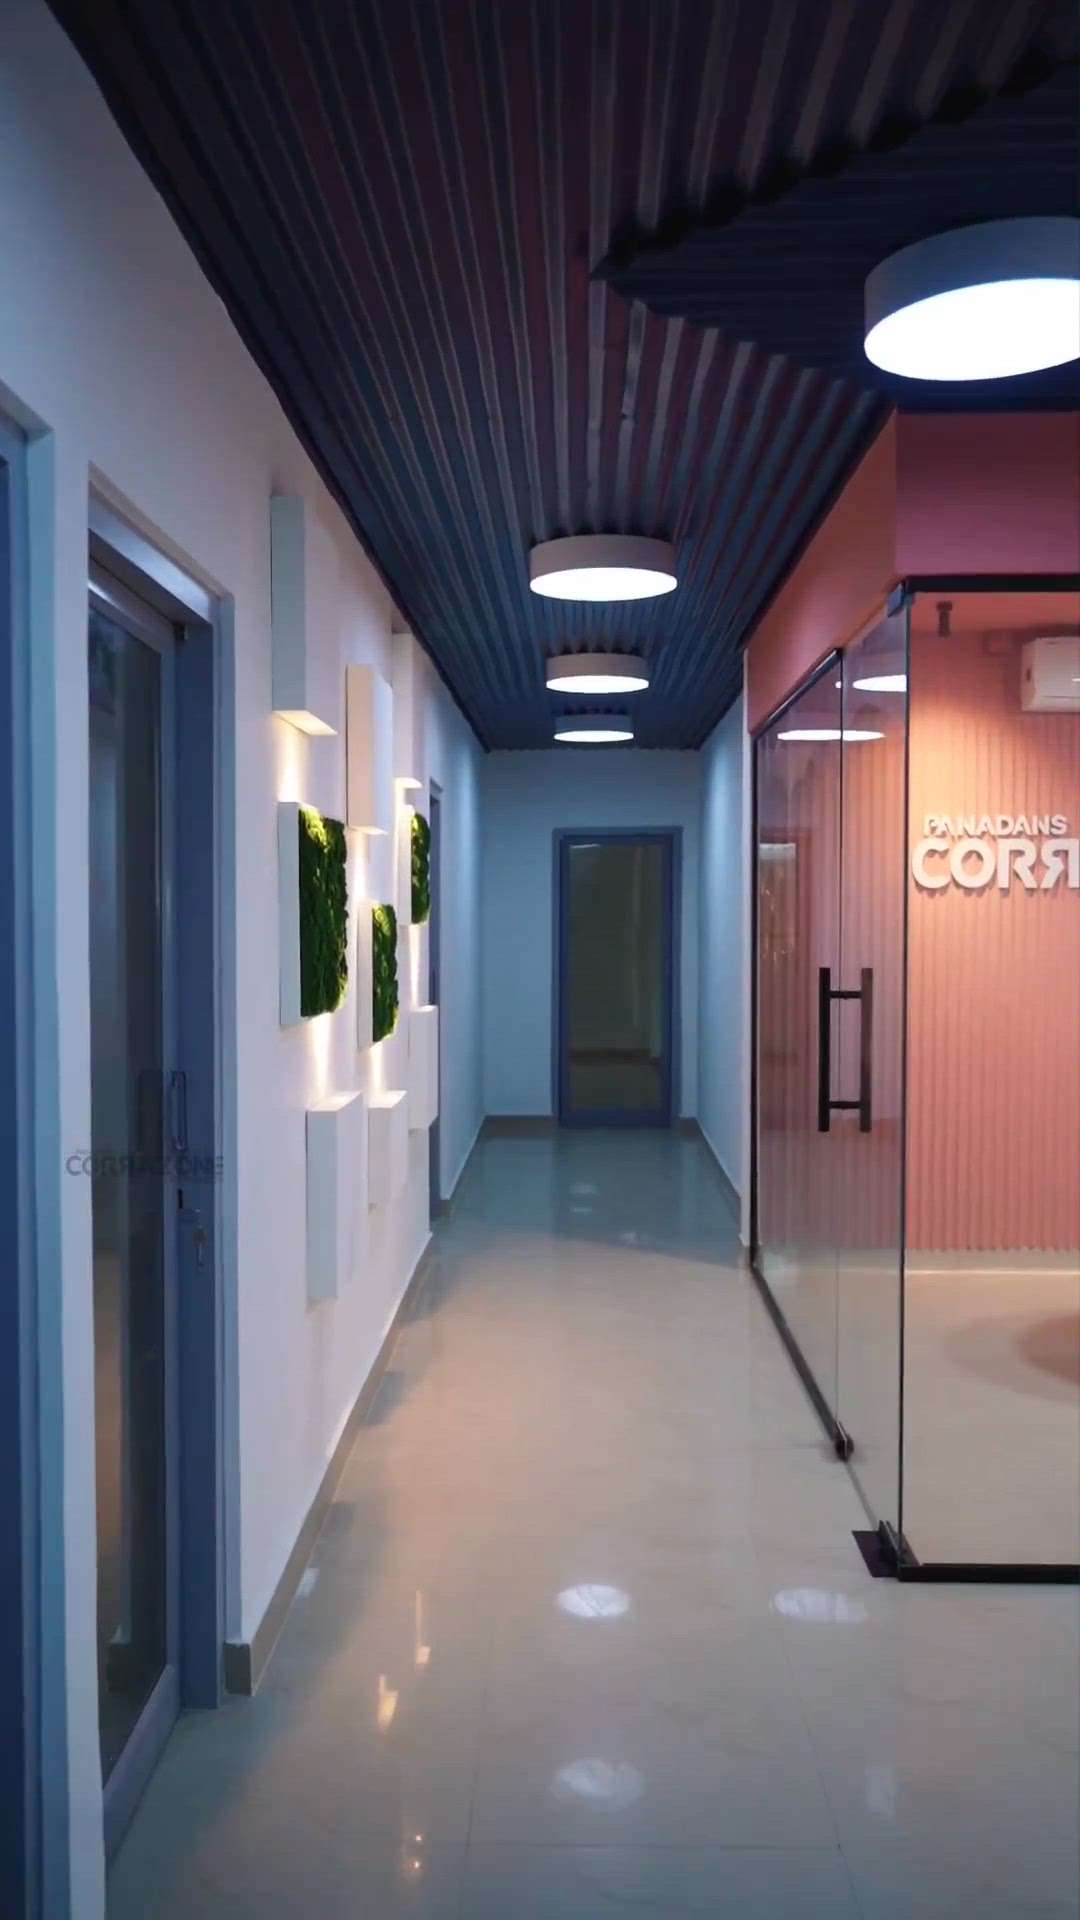 Build your commercial space in budget friendly and easy method
Personalised, premium and affordable Interiors.

De Desire Studio makes your home a better space to live in. 
Ph:9567293355

Hope you like the video and do drop in comments 

@archidesign.kerala

#kerala🌴 #interiør #interiordesigns #homedesign  #homesweethome #homeinspirations  #homedecor #interiorstyling #internationaldesigner #indiandesigner #indianinteriordesigners 
#dedesirestudio #malyali #mallu #malluvideos #mallureposts #indiatravel #international #home #furniture #space #design #instagram #kerala_architecture # #